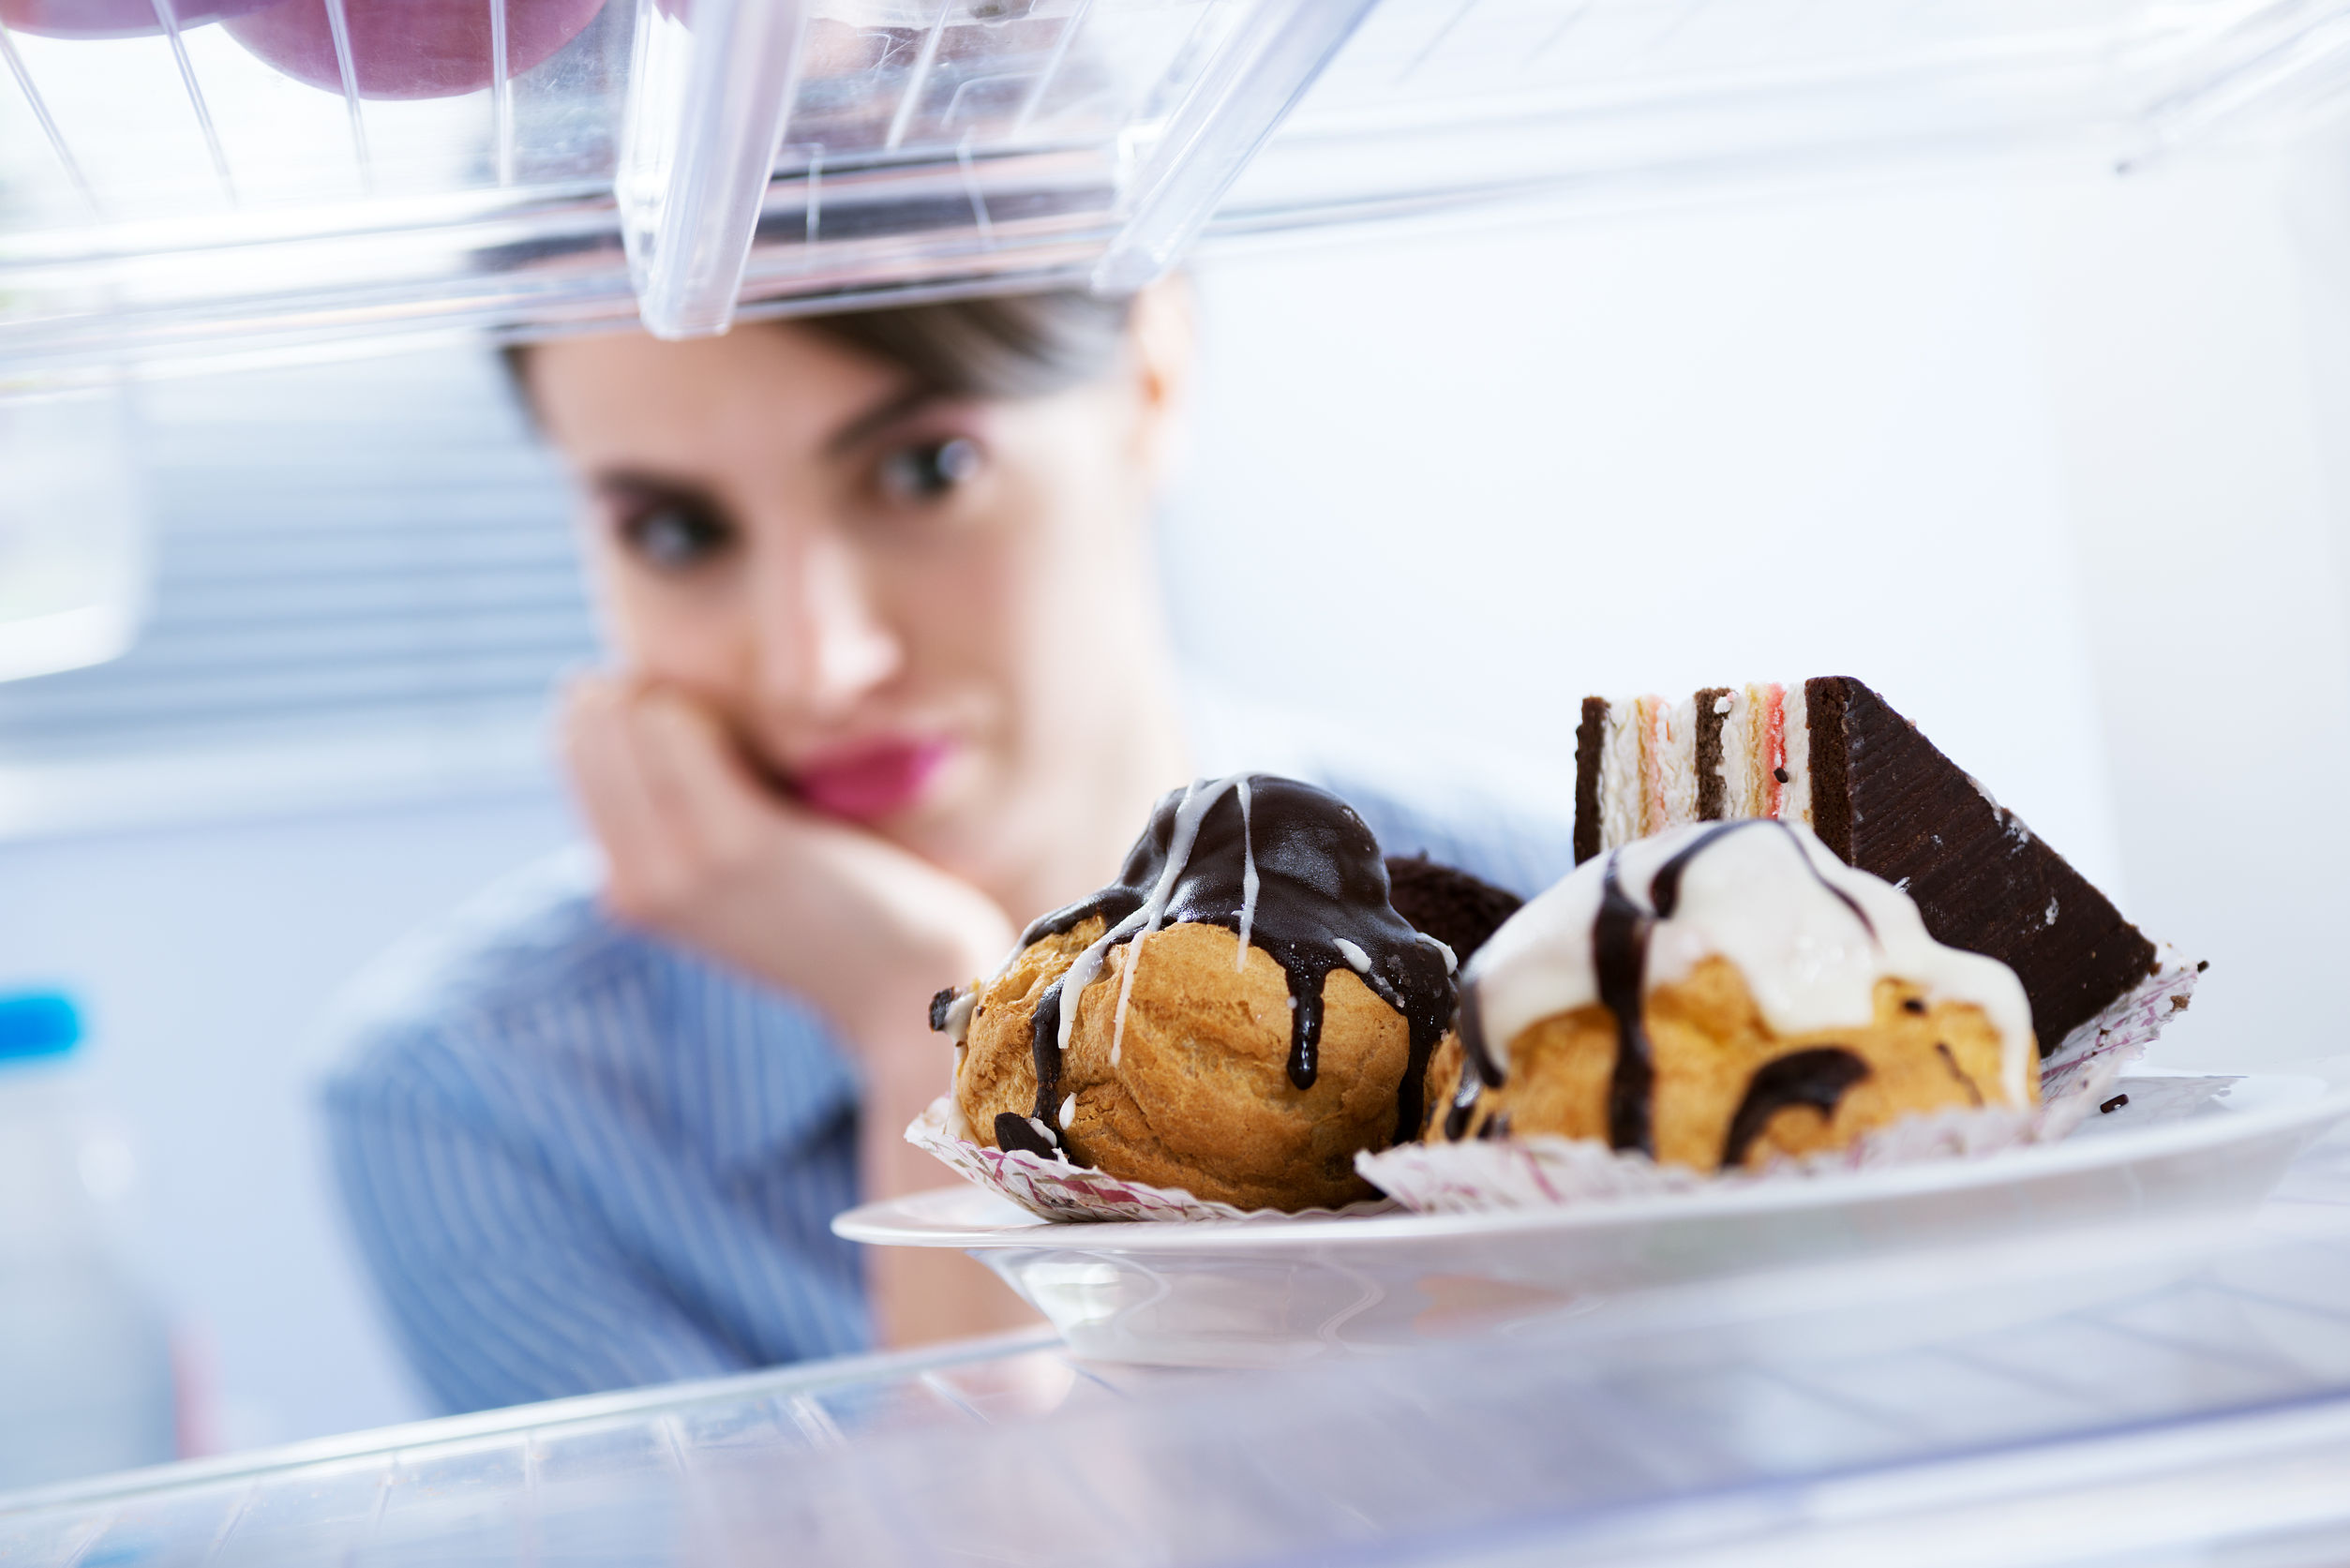 Young hungry woman in front of refrigerator craving chocolate pastries